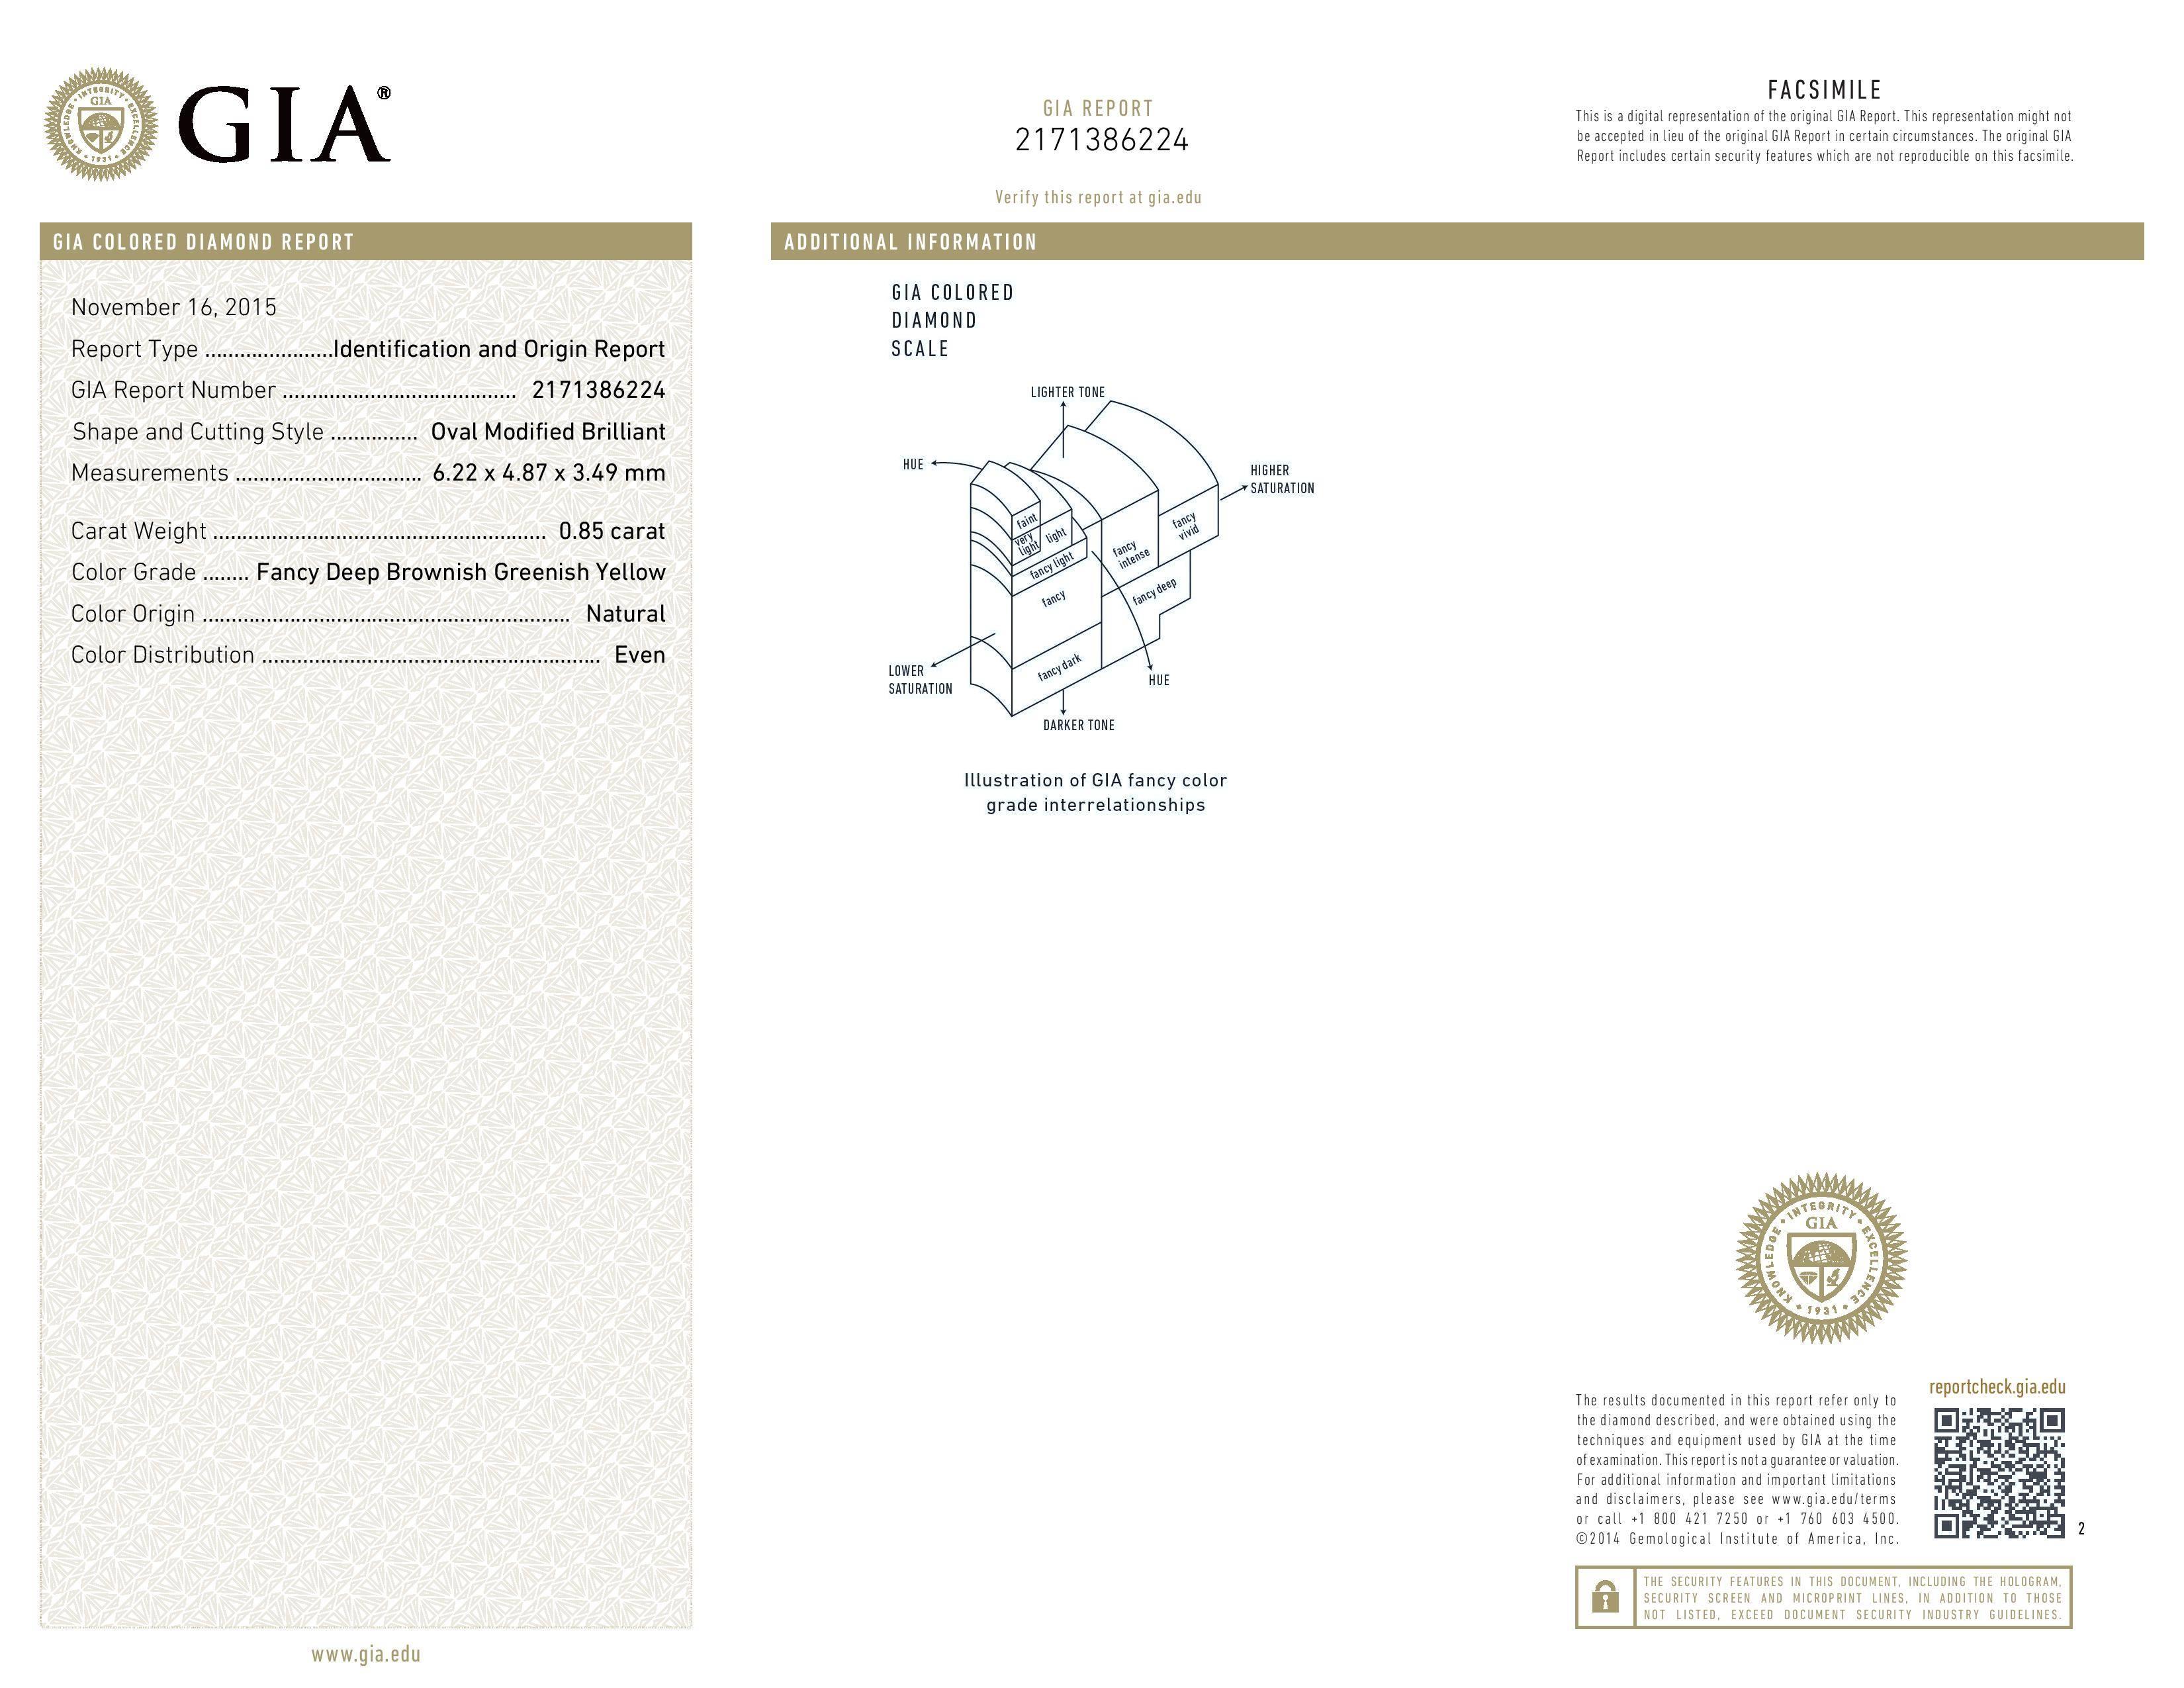 A dainty 0.85ct GIA certified fancy deep brownish greenish yellow diamond, 18K white gold ring, accented by a total of 0.29ct round brilliant diamonds.
Size 6. Re-sizing is complimentary upon request.
GIA certificate is attached.